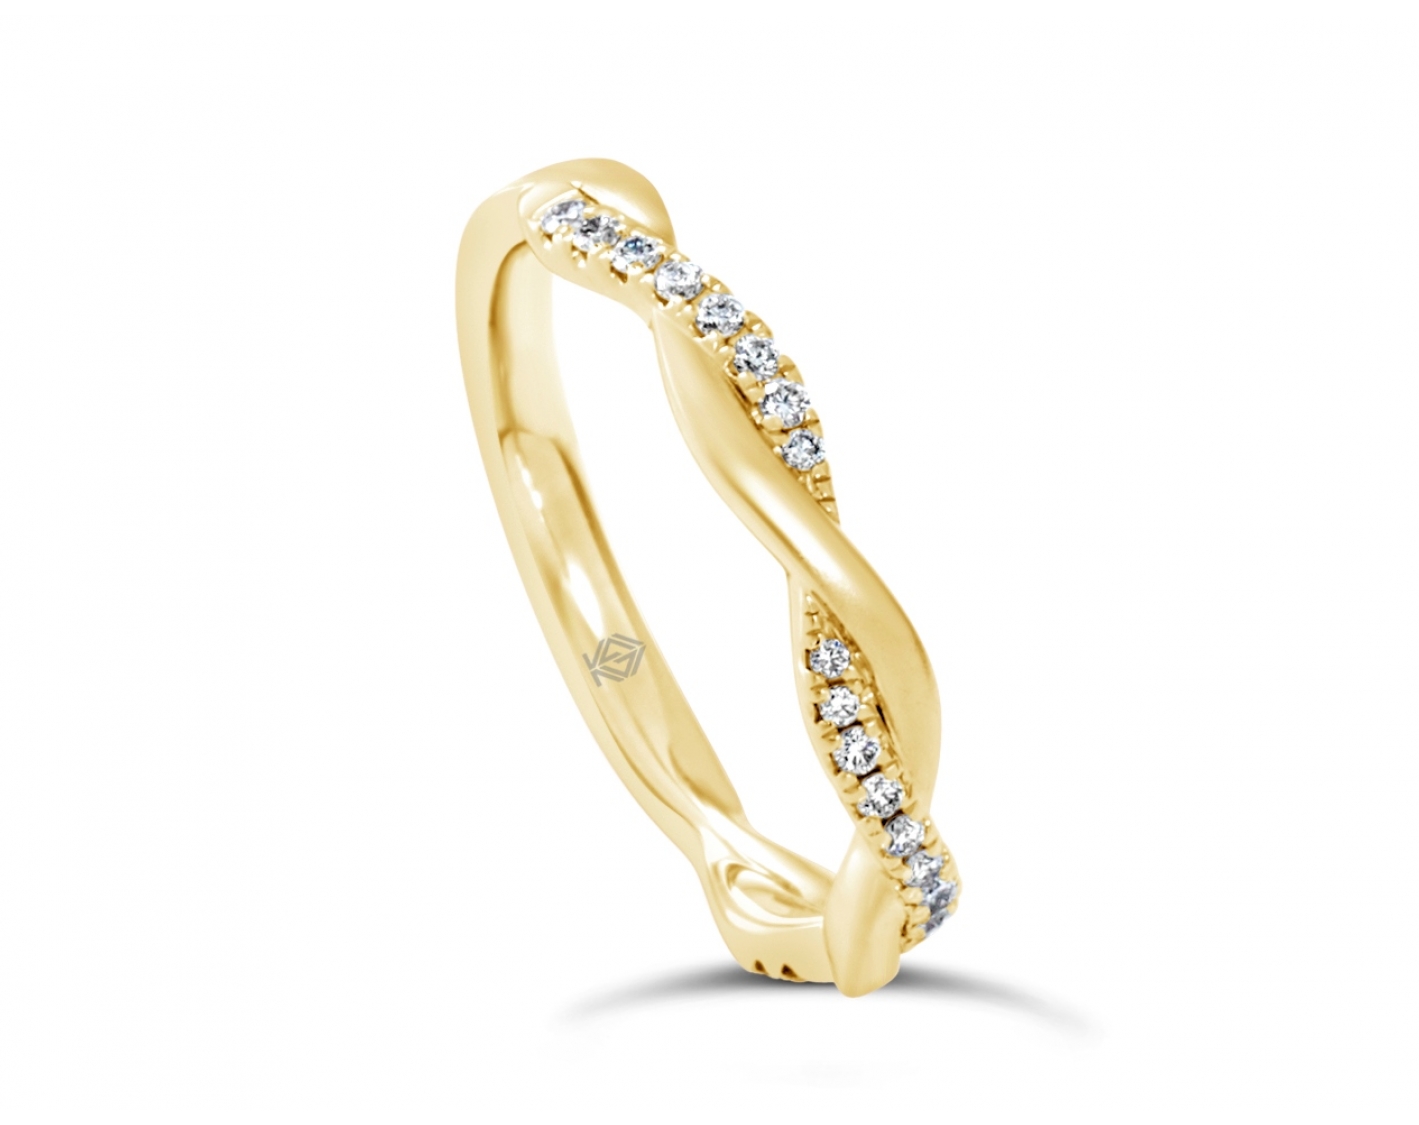 18k yellow gold twisted matt and shiny pave set wedding ring Photos & images